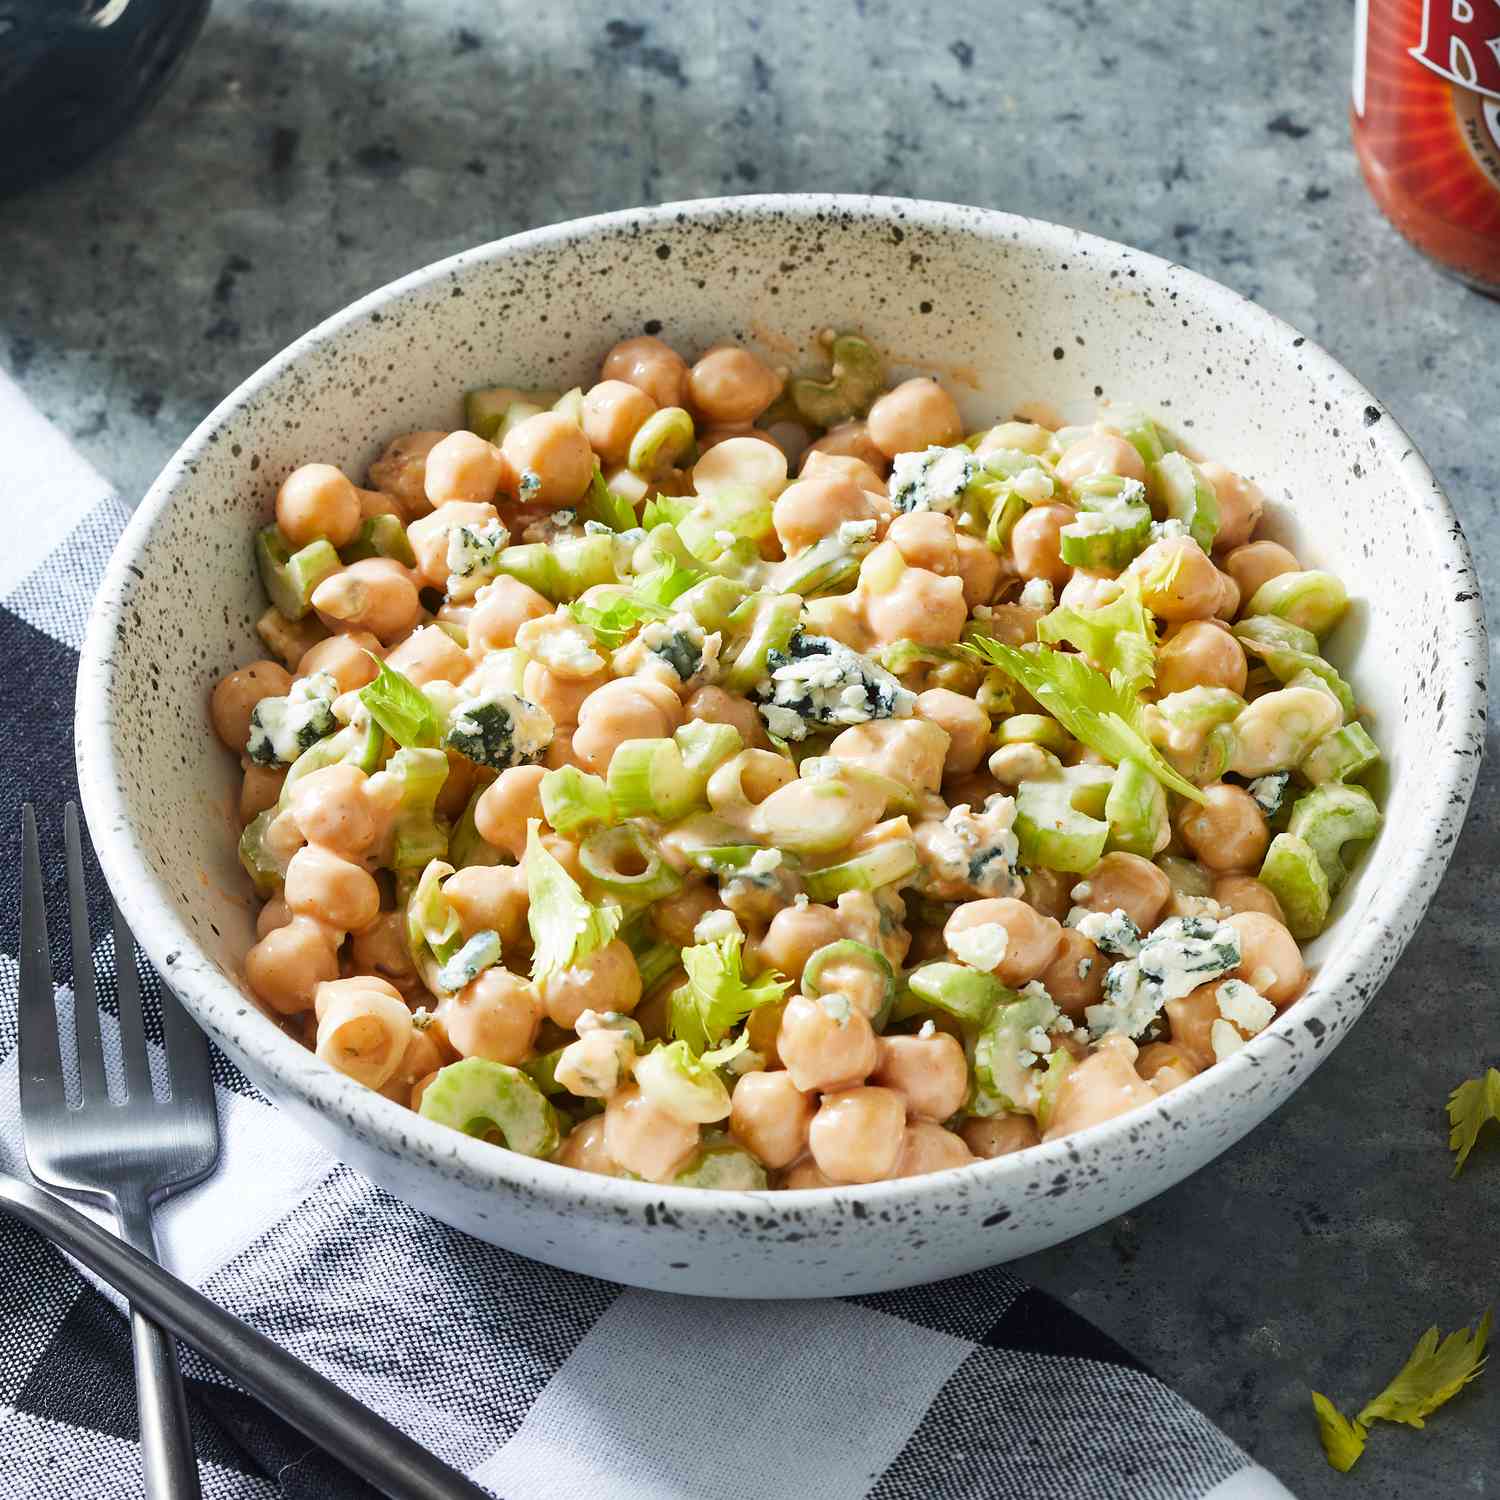 a recipe photo of the Buffalo Chickpea Salad served in a bowl